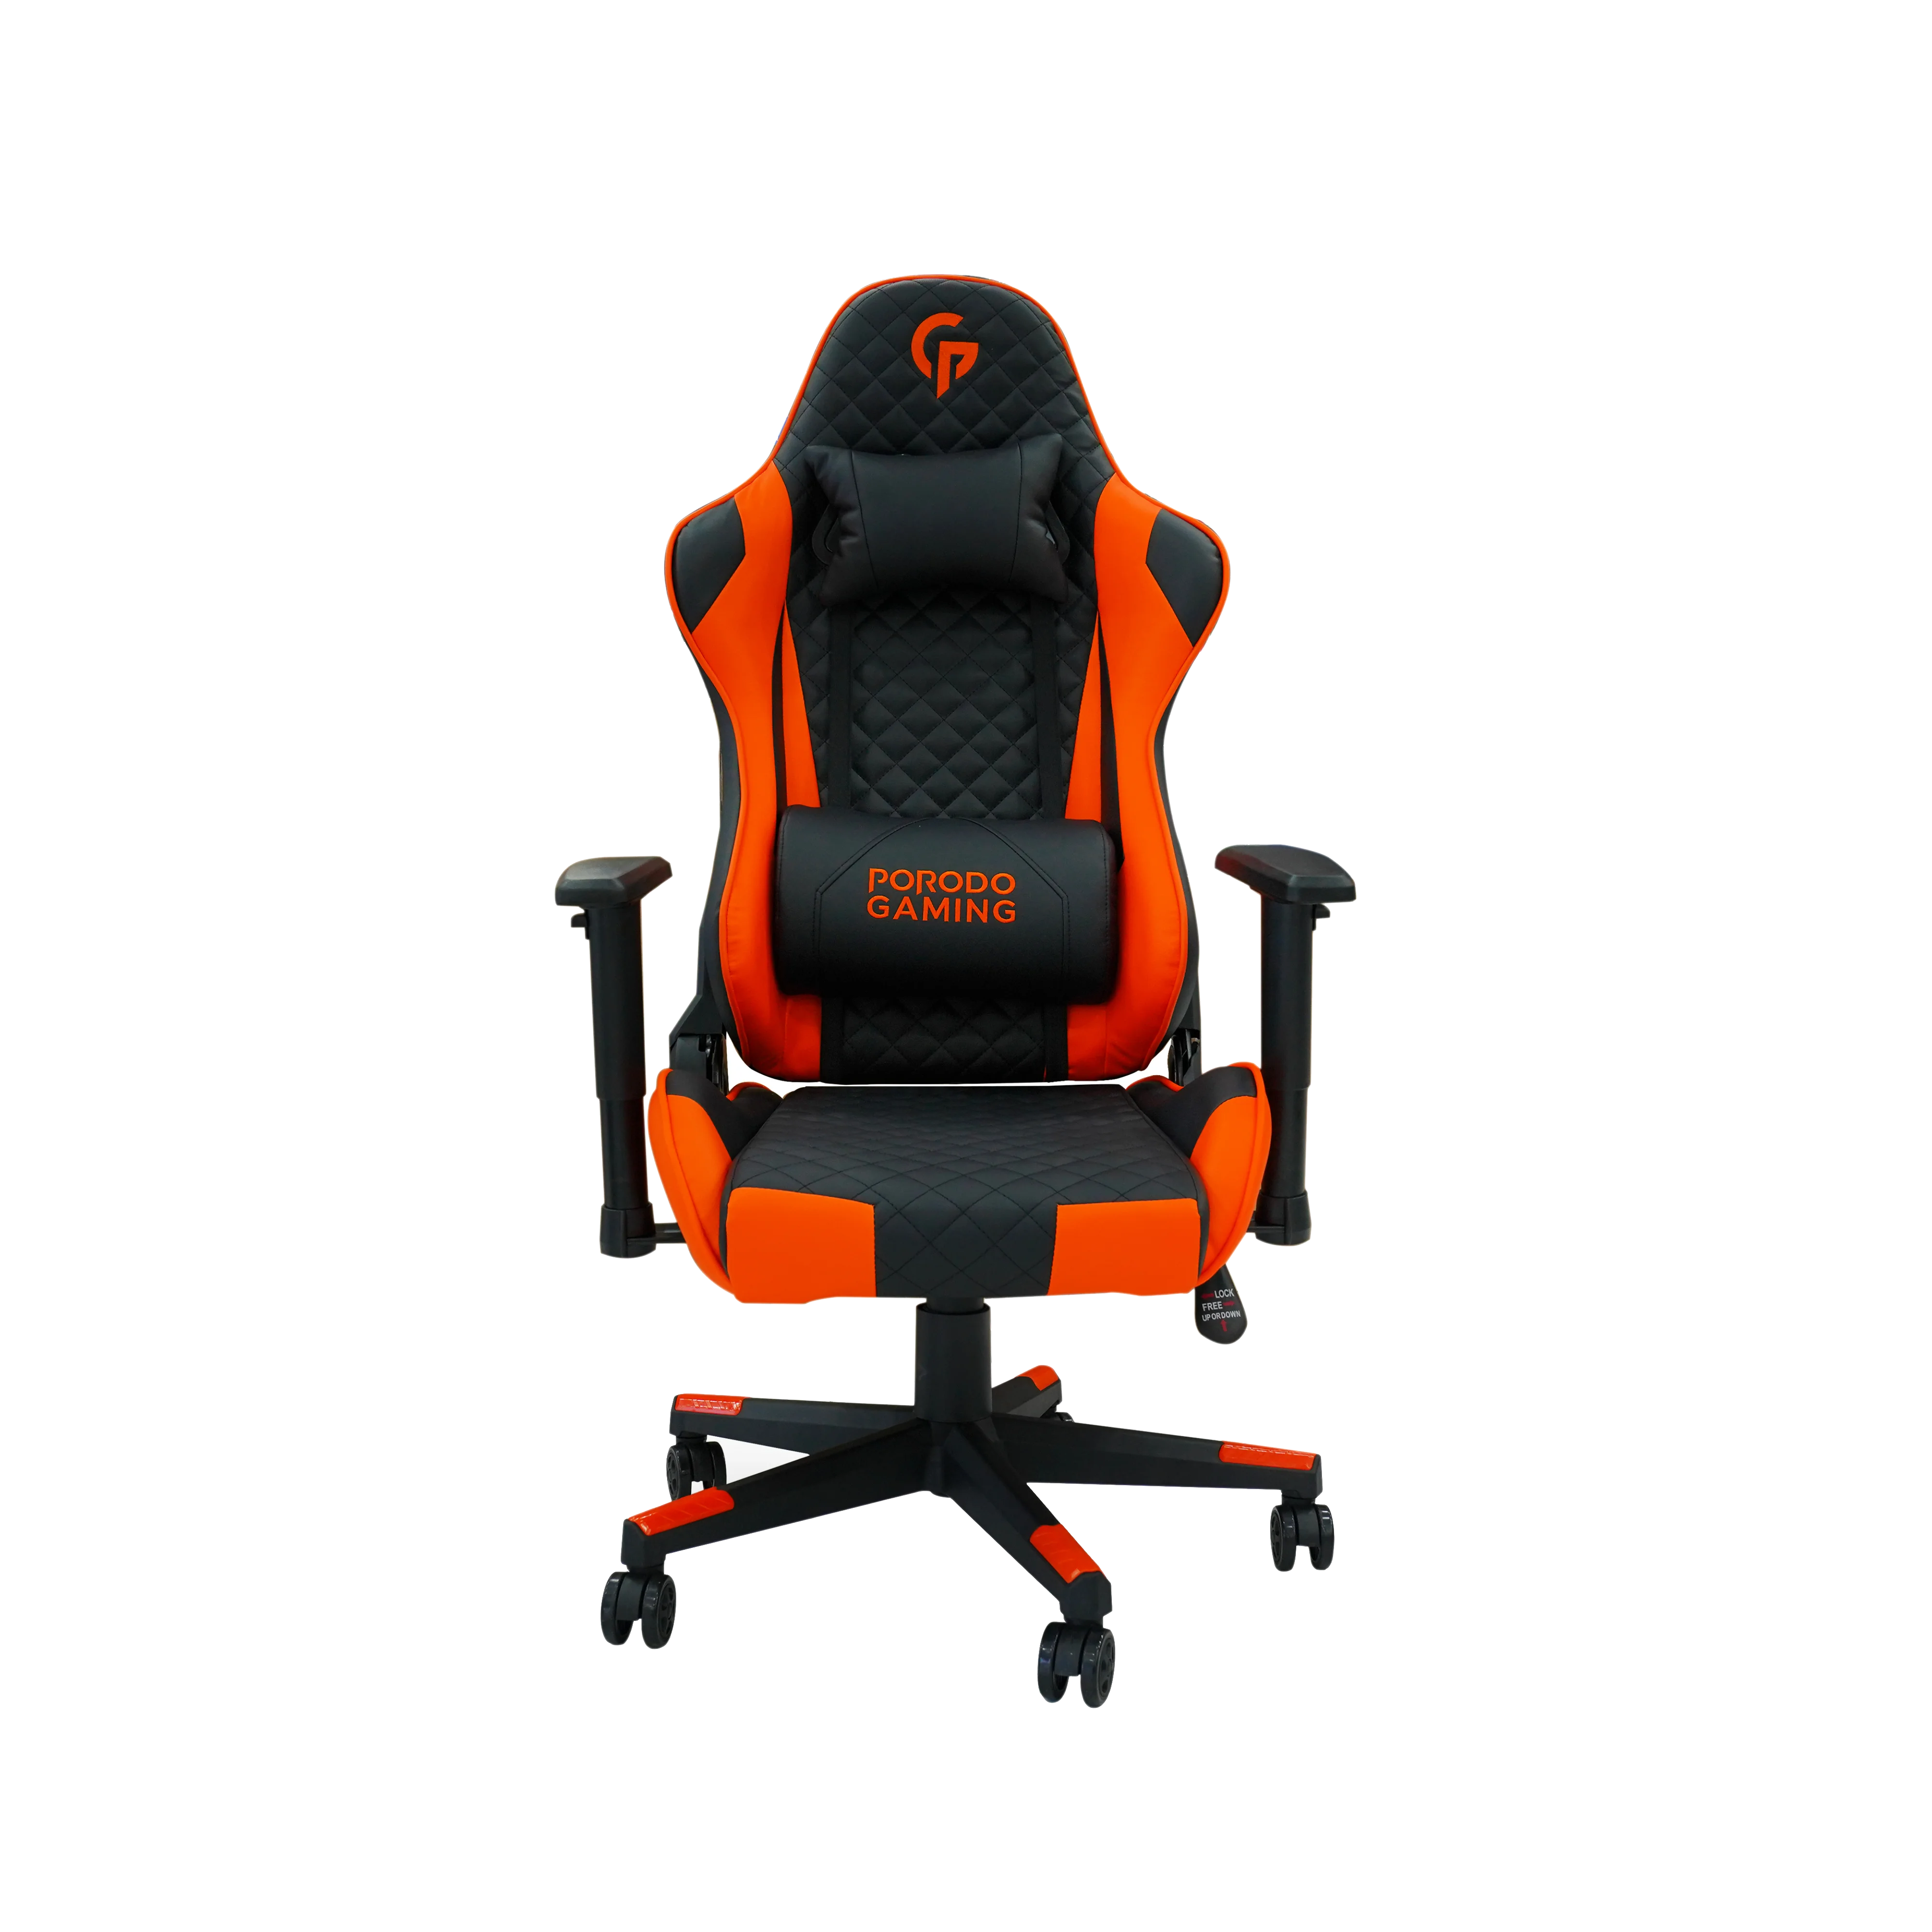 Professional Gaming Chair Porodo Gaming quilted seat design ultra comfortable adjustable backrest and armrest class 3 gas lift